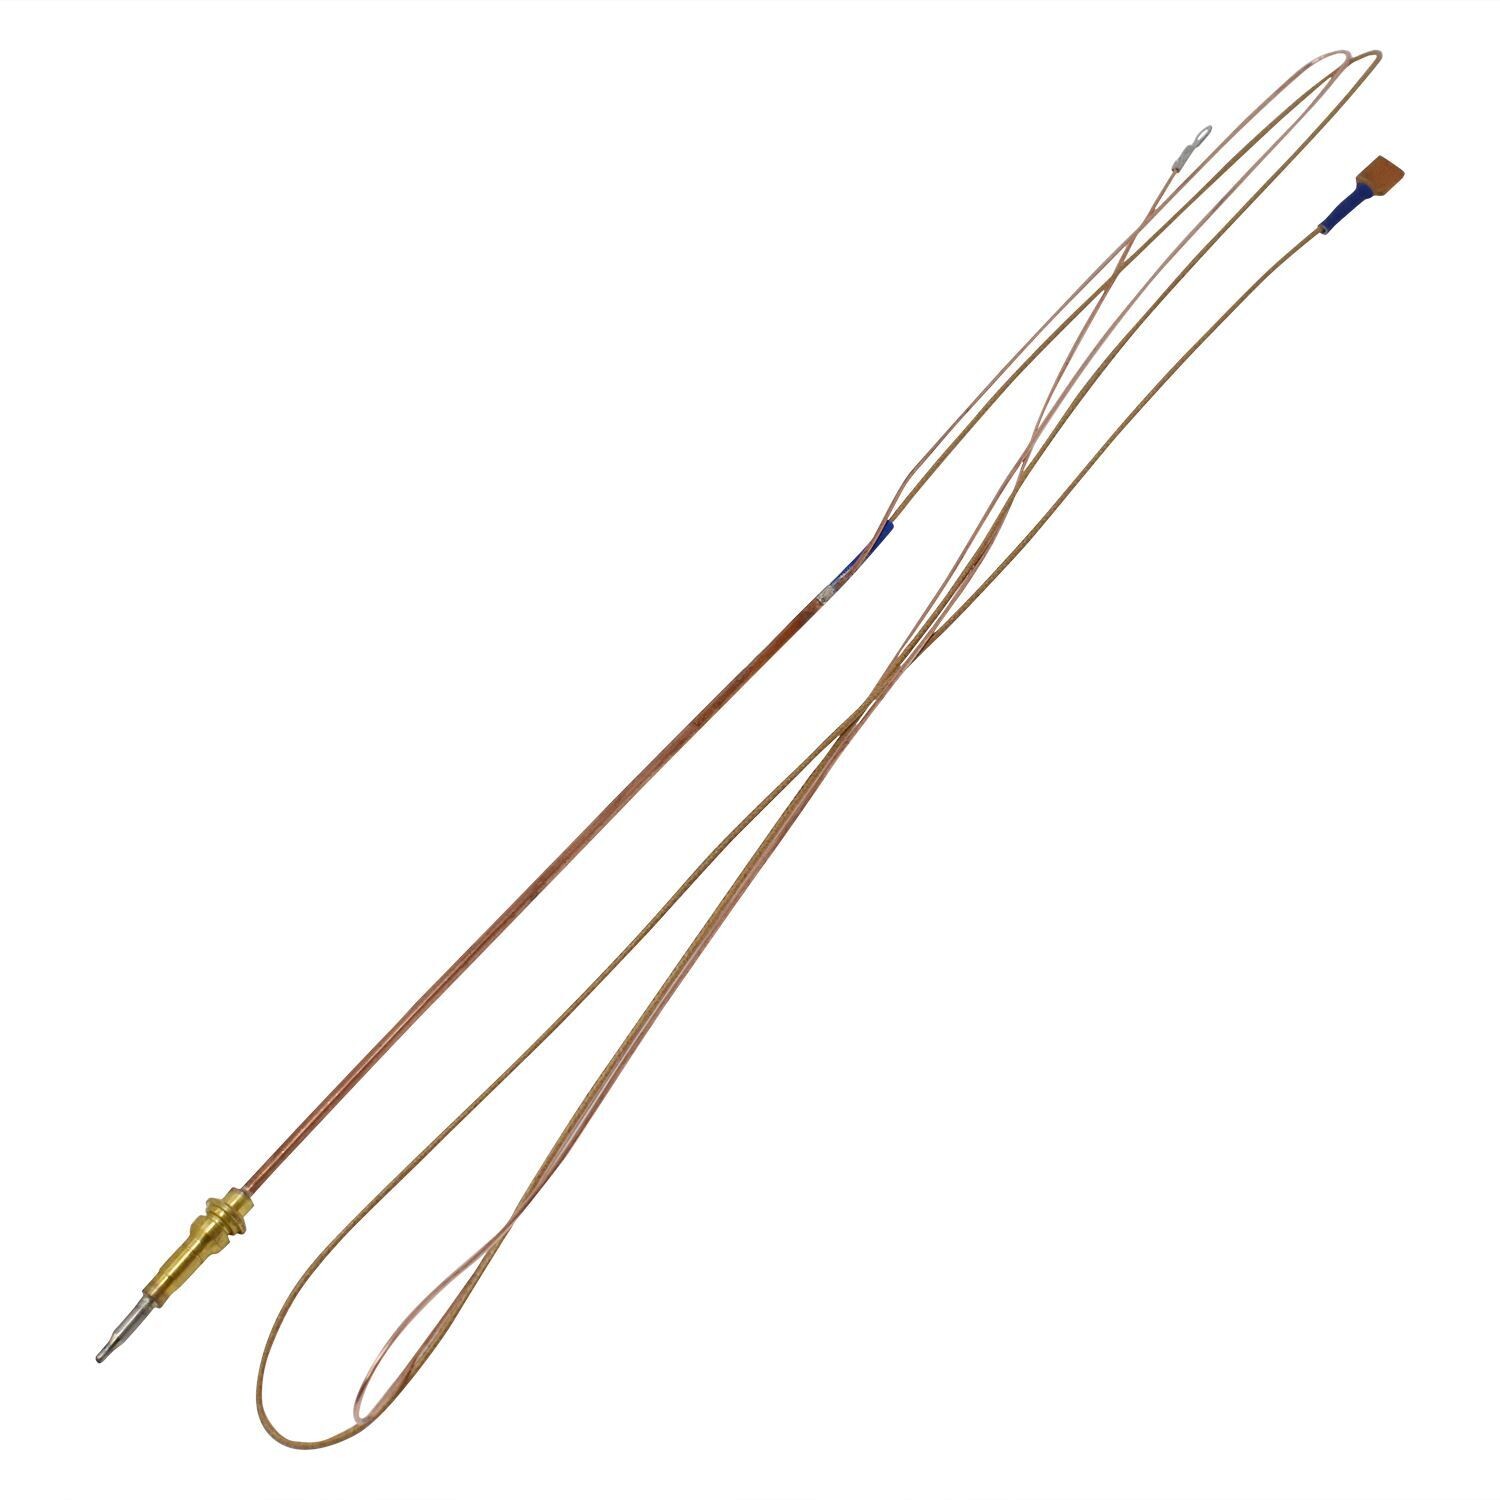 sparefixd Thermocouple 1400mm for Hotpoint Cooker Oven C00269643 